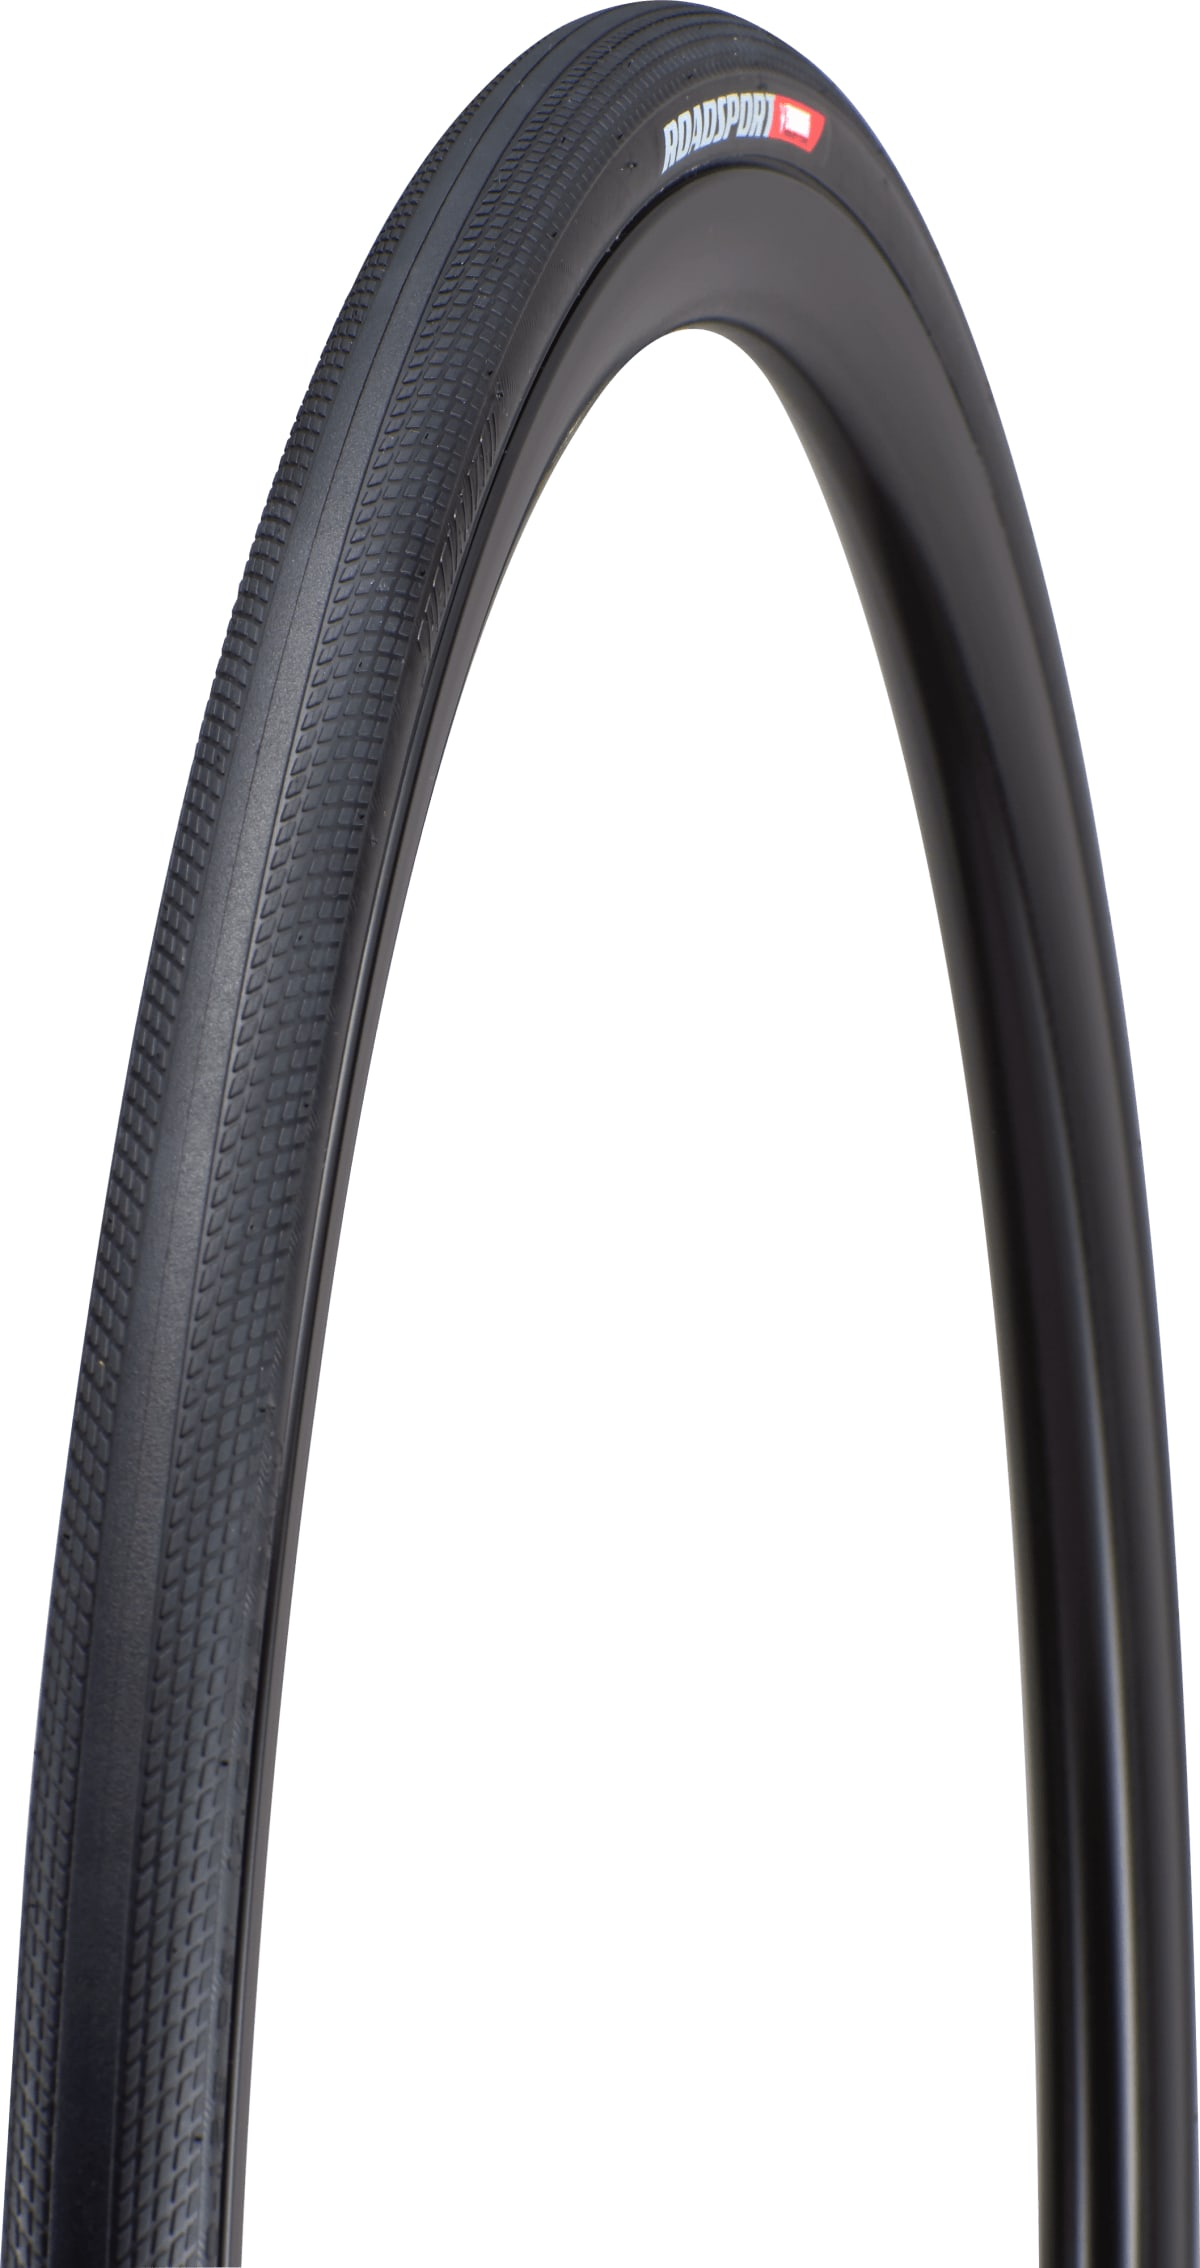 Cycles UK Specialized  RoadSport Elite Road Tyre 700 x 26 Black